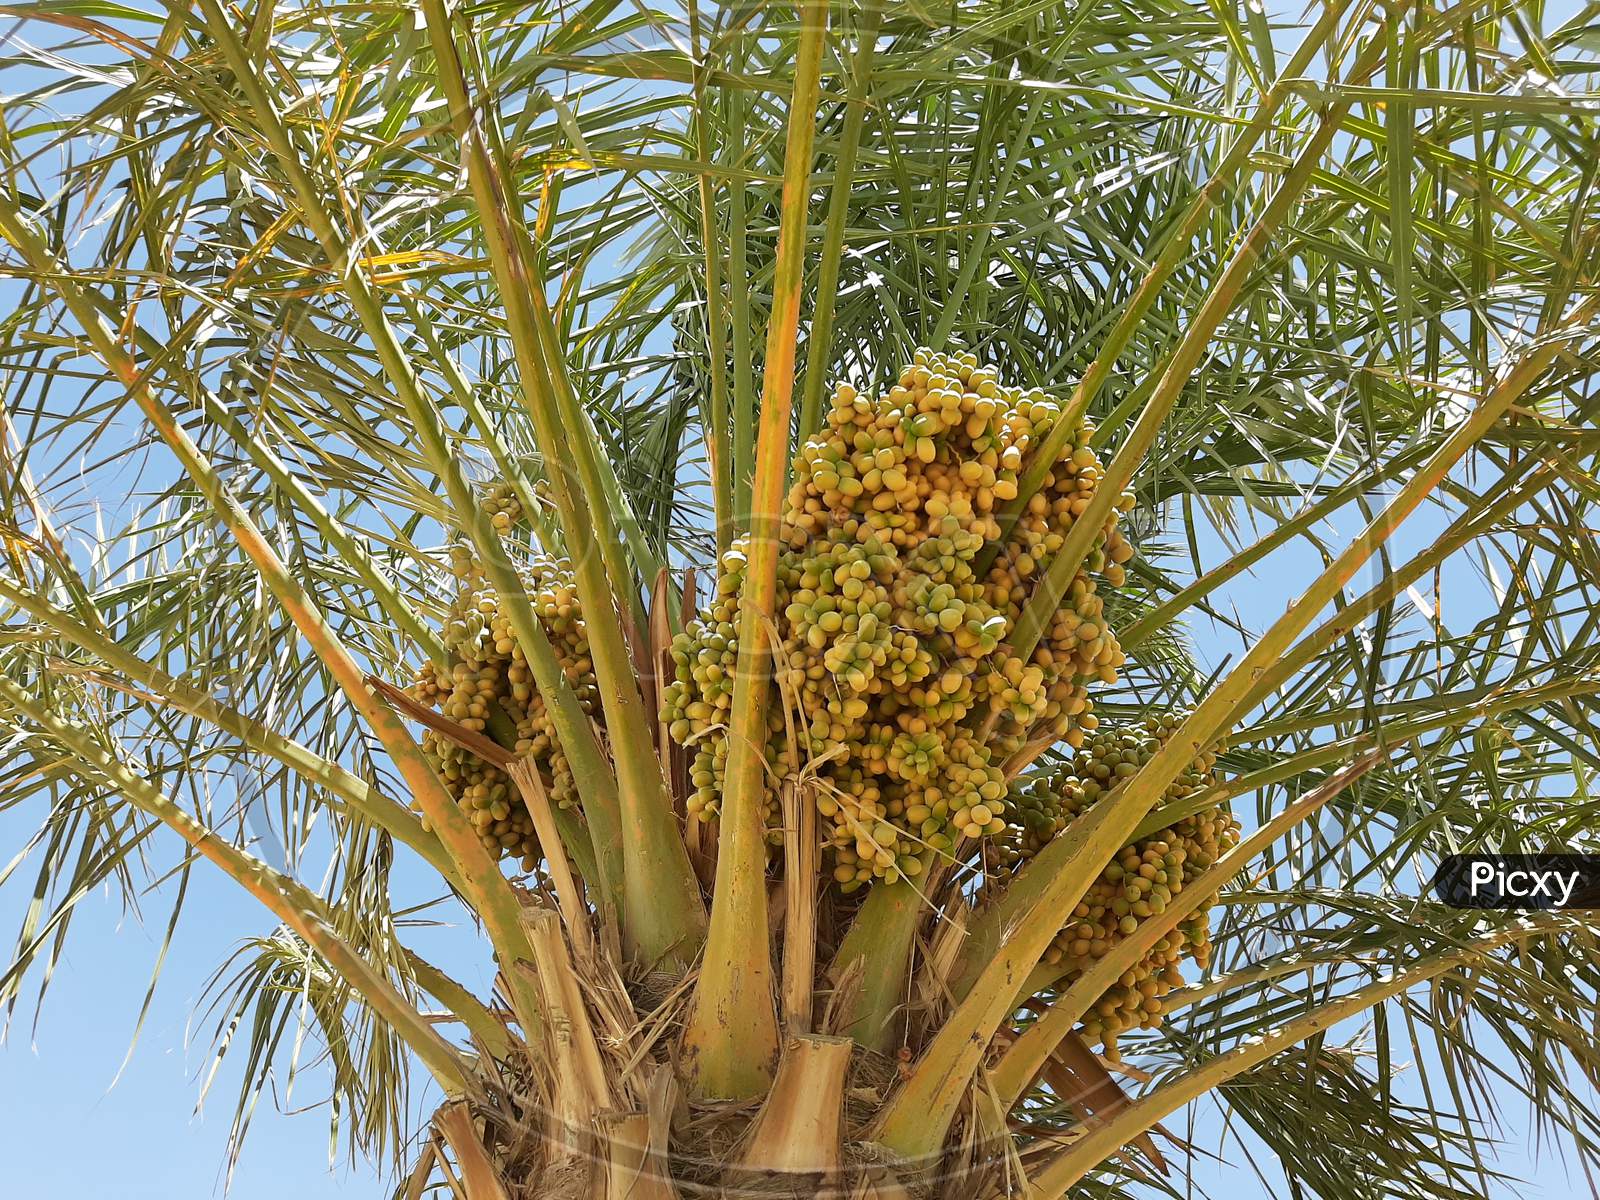 Bunch of Dates on Dates Palm